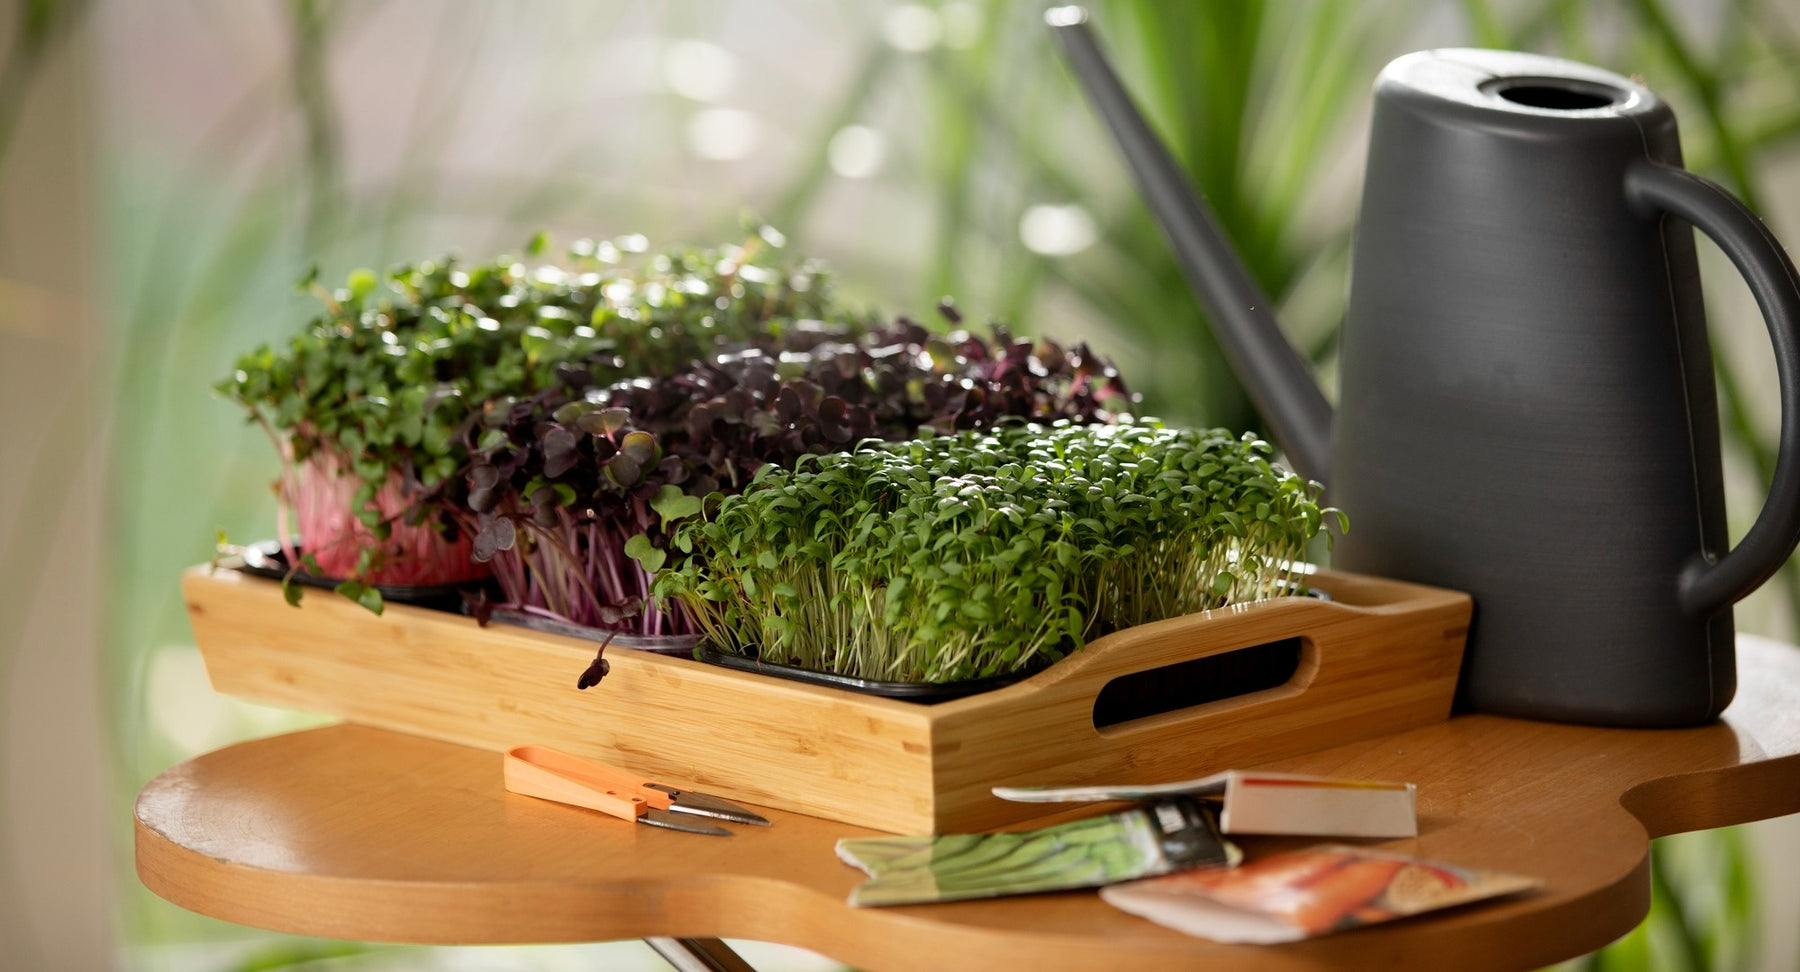 Container Garden Ideas for Growing Tons of Food in A Small Space